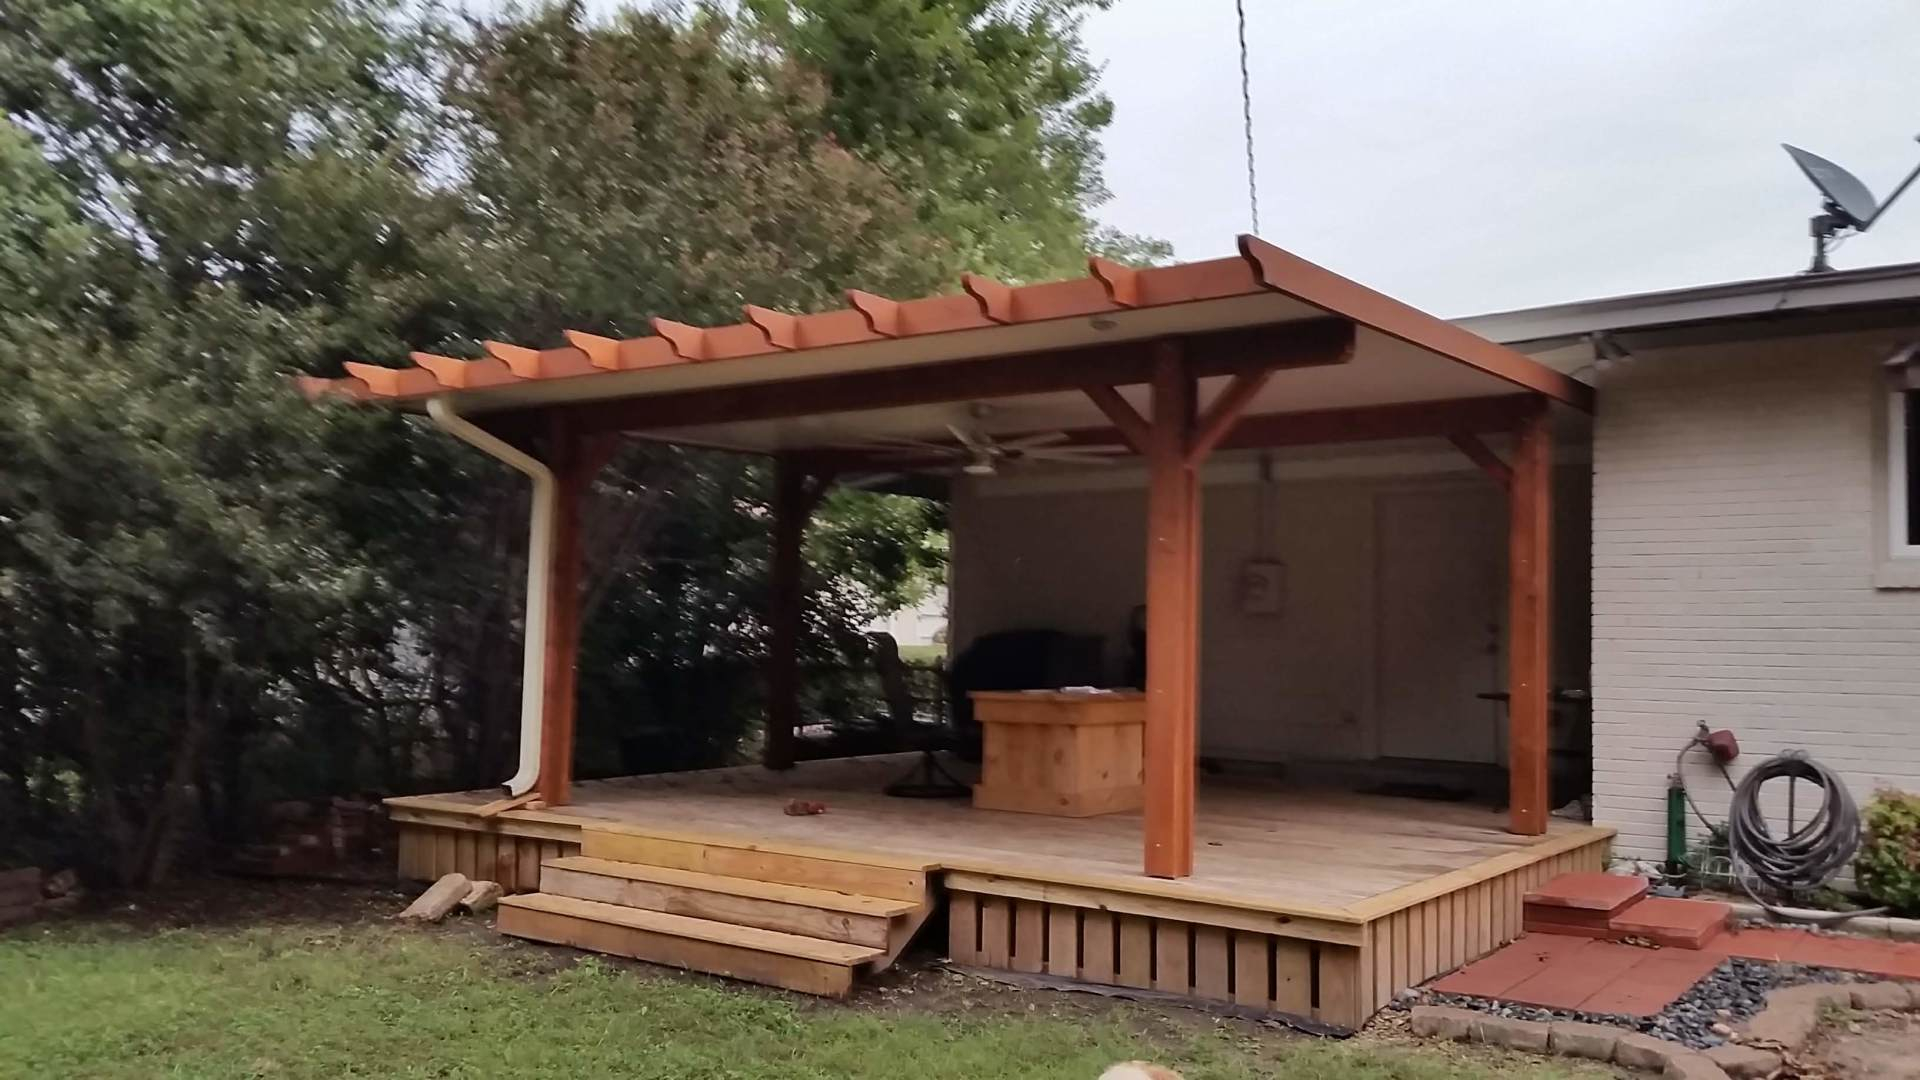 Ft Worth Area Patio Cover And Screen Room Specialists within dimensions 1920 X 1080